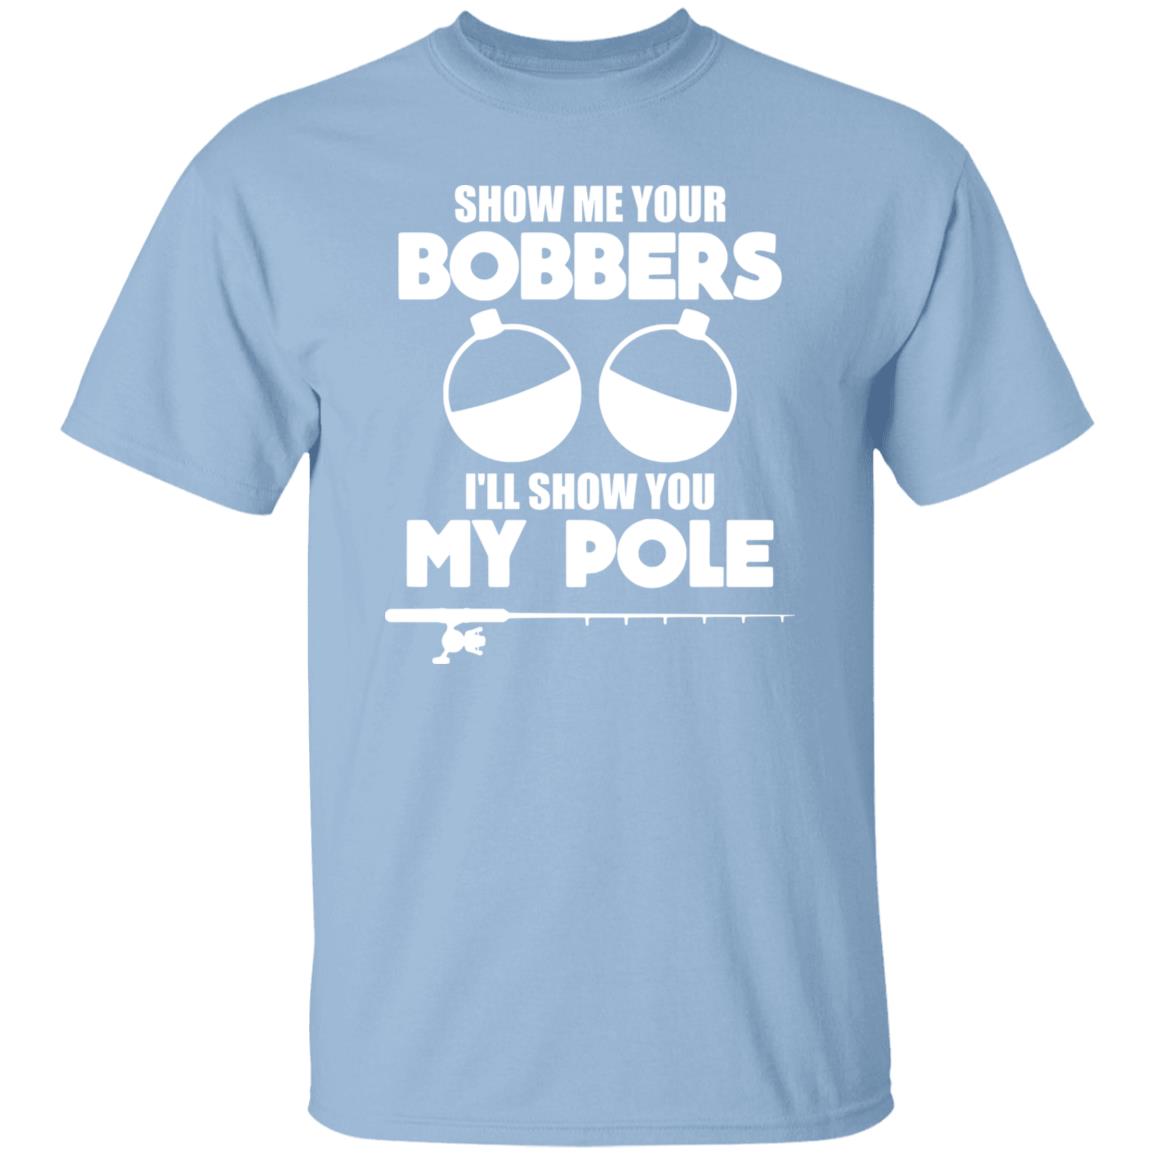 HRCL FL - Show Me Your Bobbers I'll Show You My Pole - 2 Sided G500 5.3 oz. T-Shirt